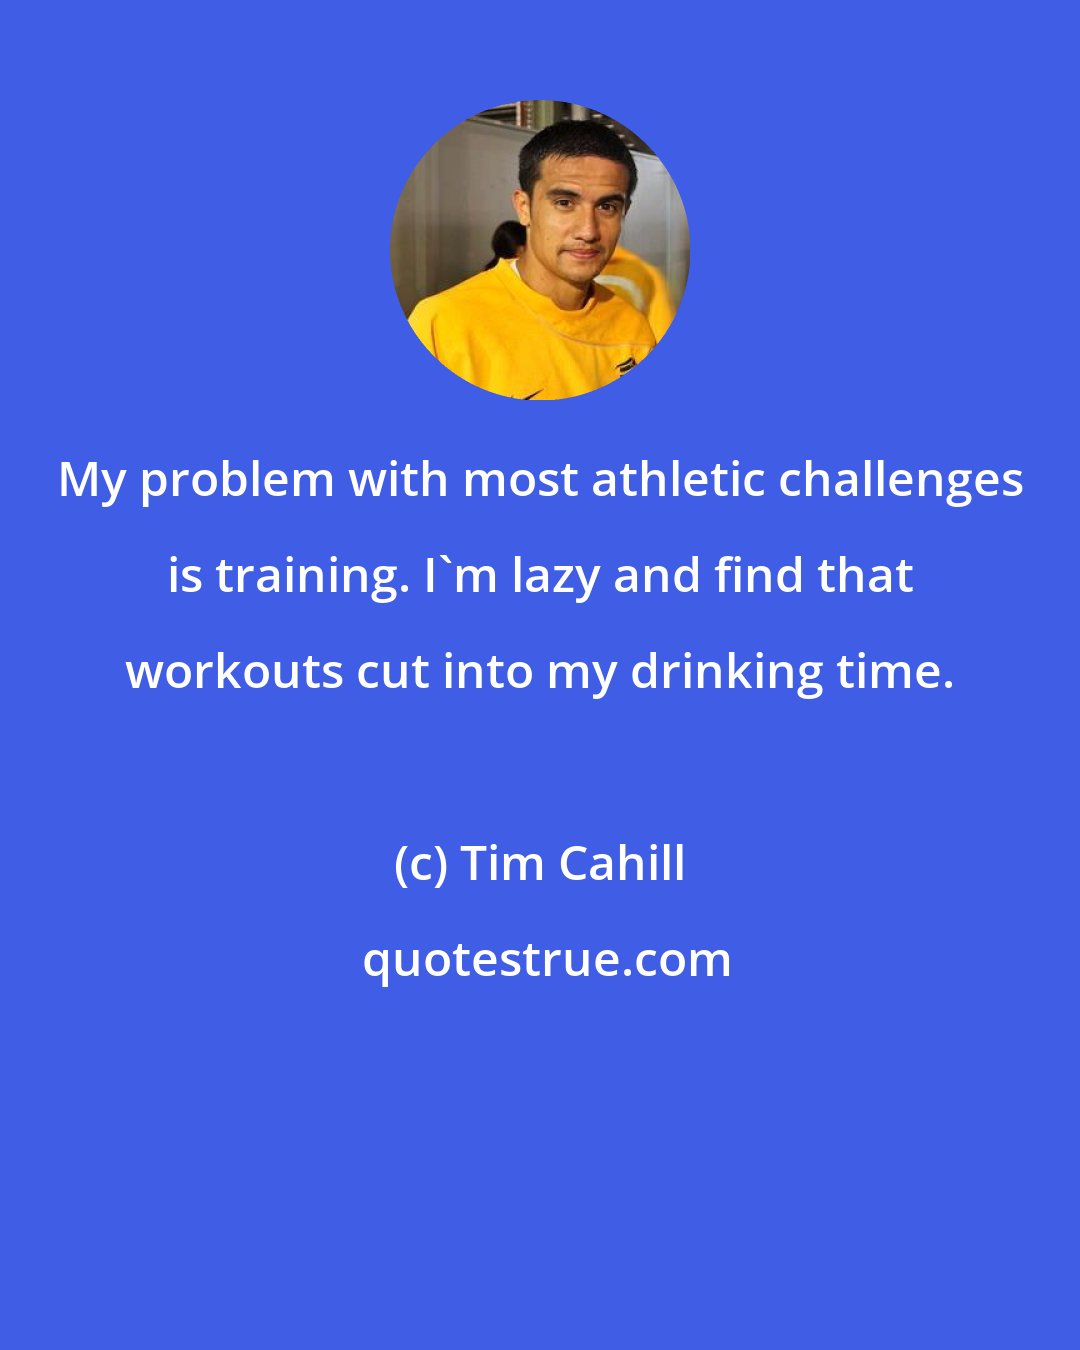 Tim Cahill: My problem with most athletic challenges is training. I'm lazy and find that workouts cut into my drinking time.